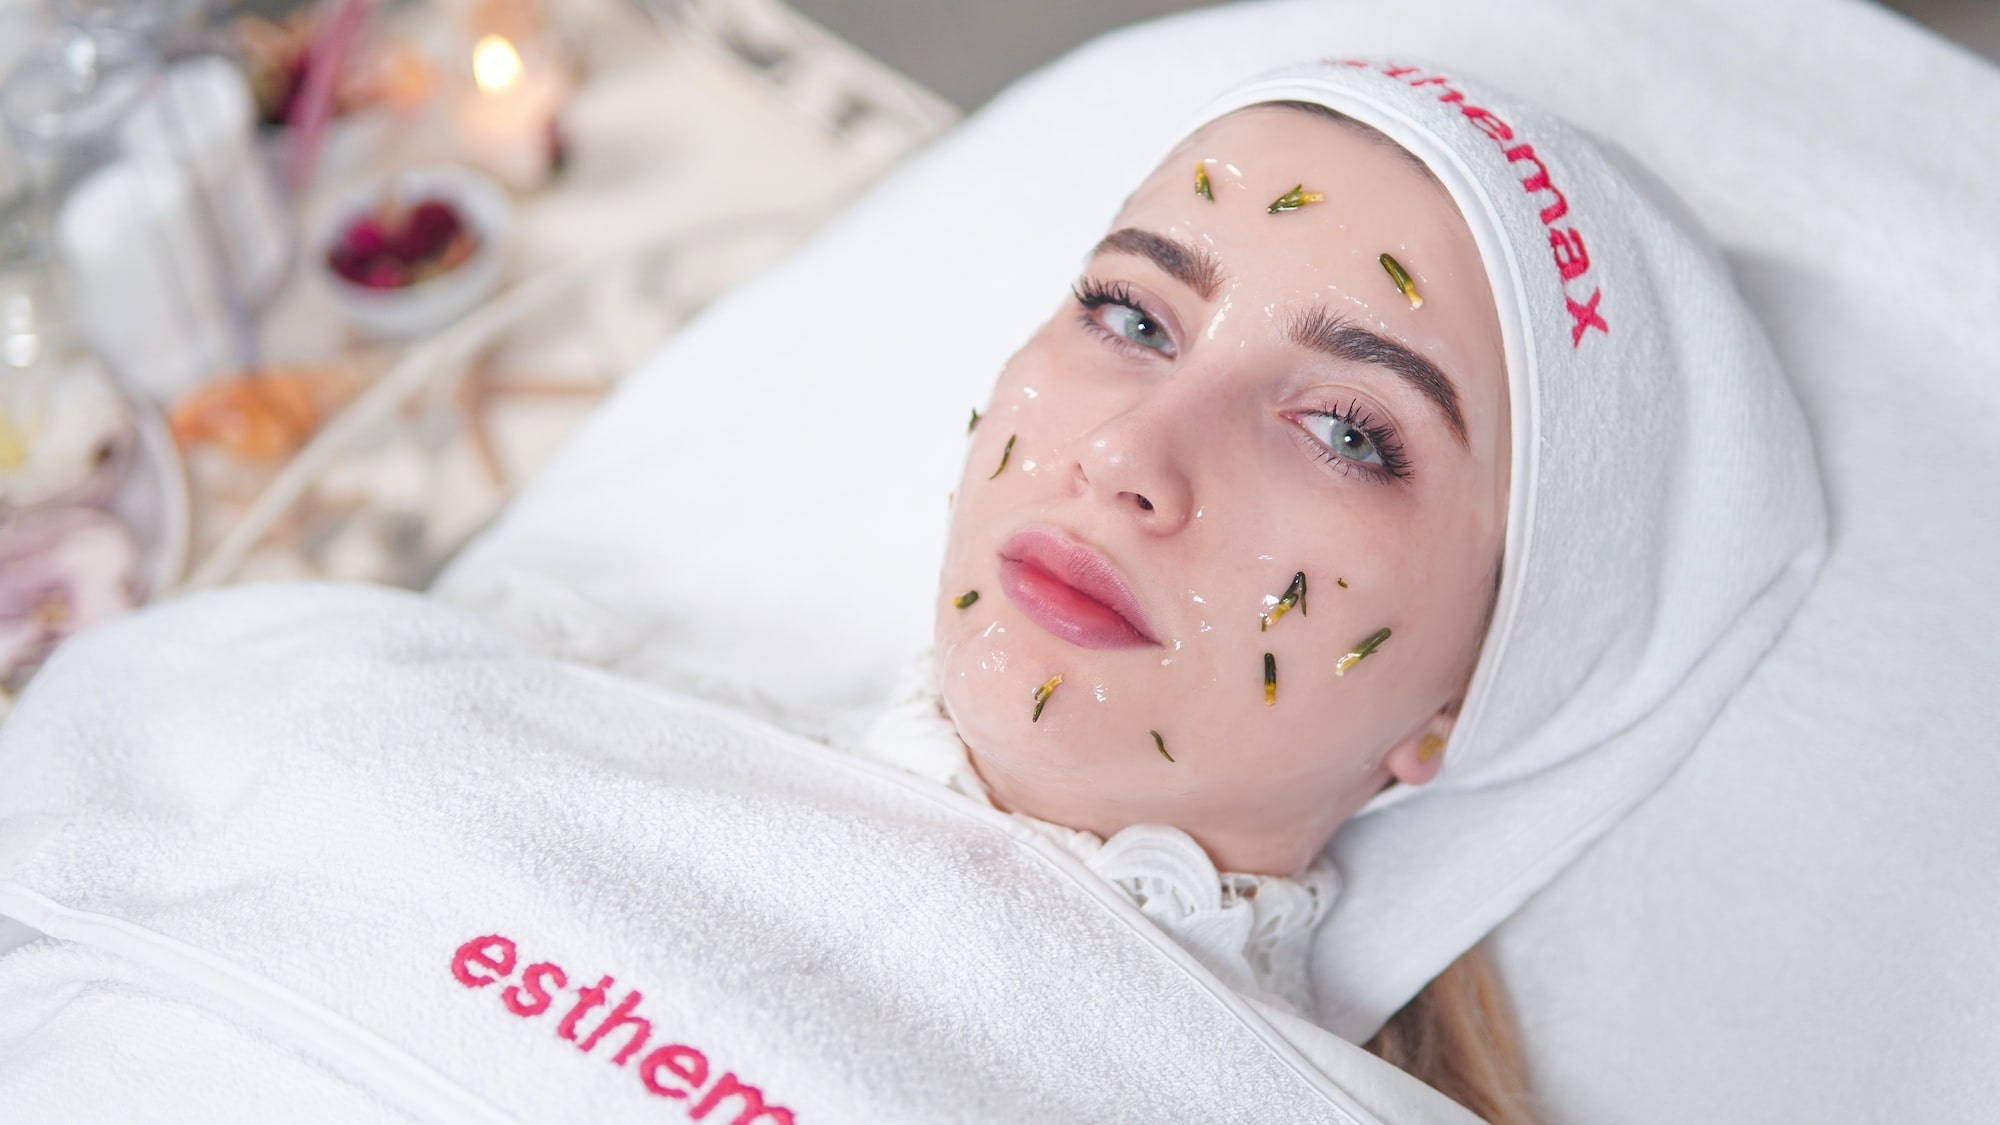 dry skin facial using peptide ingredients that help hydration, wrinkles and collagen